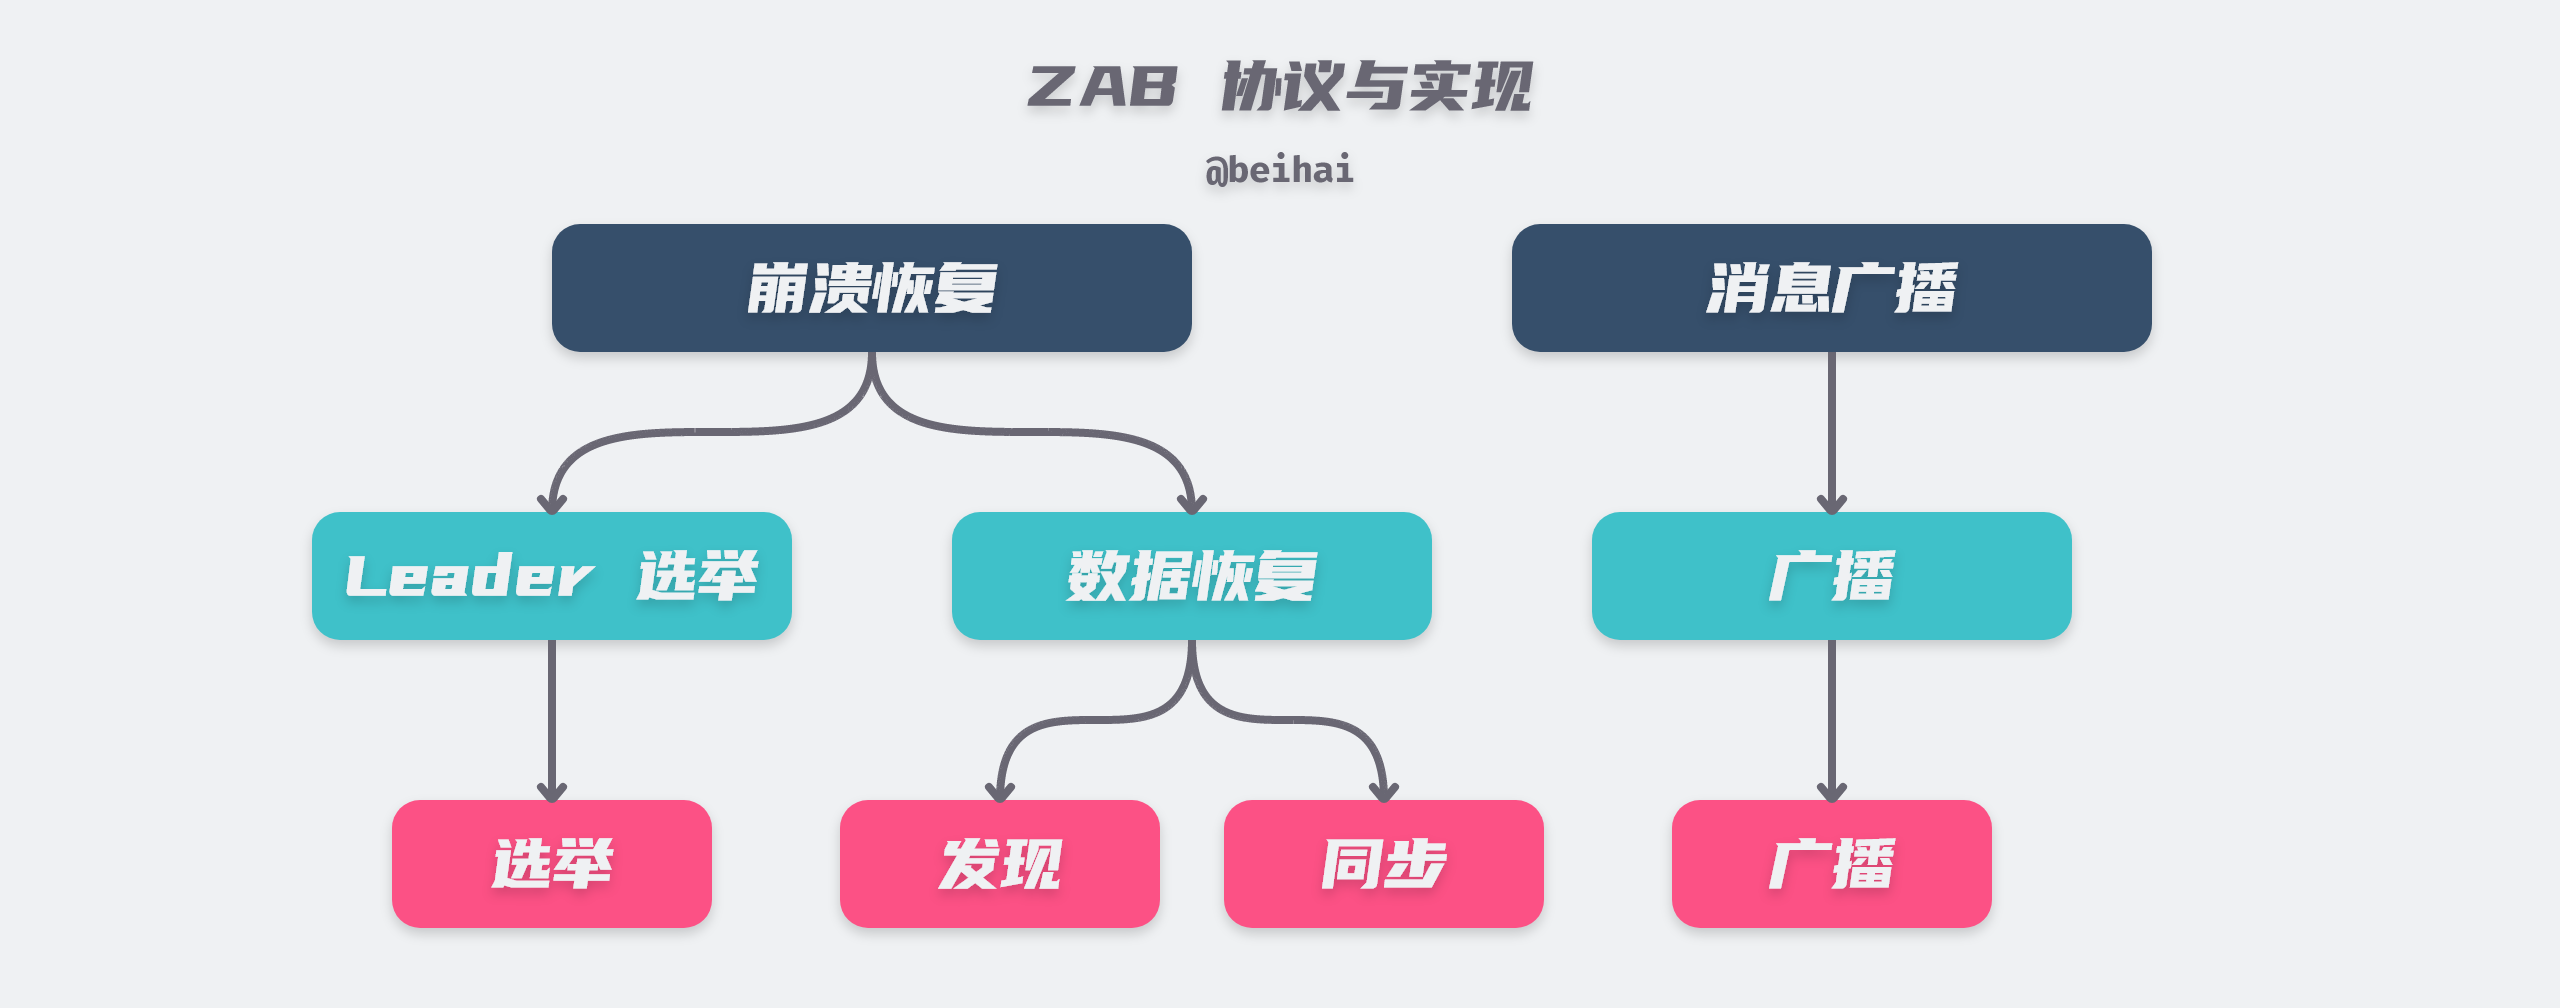 zab protocol and implementation